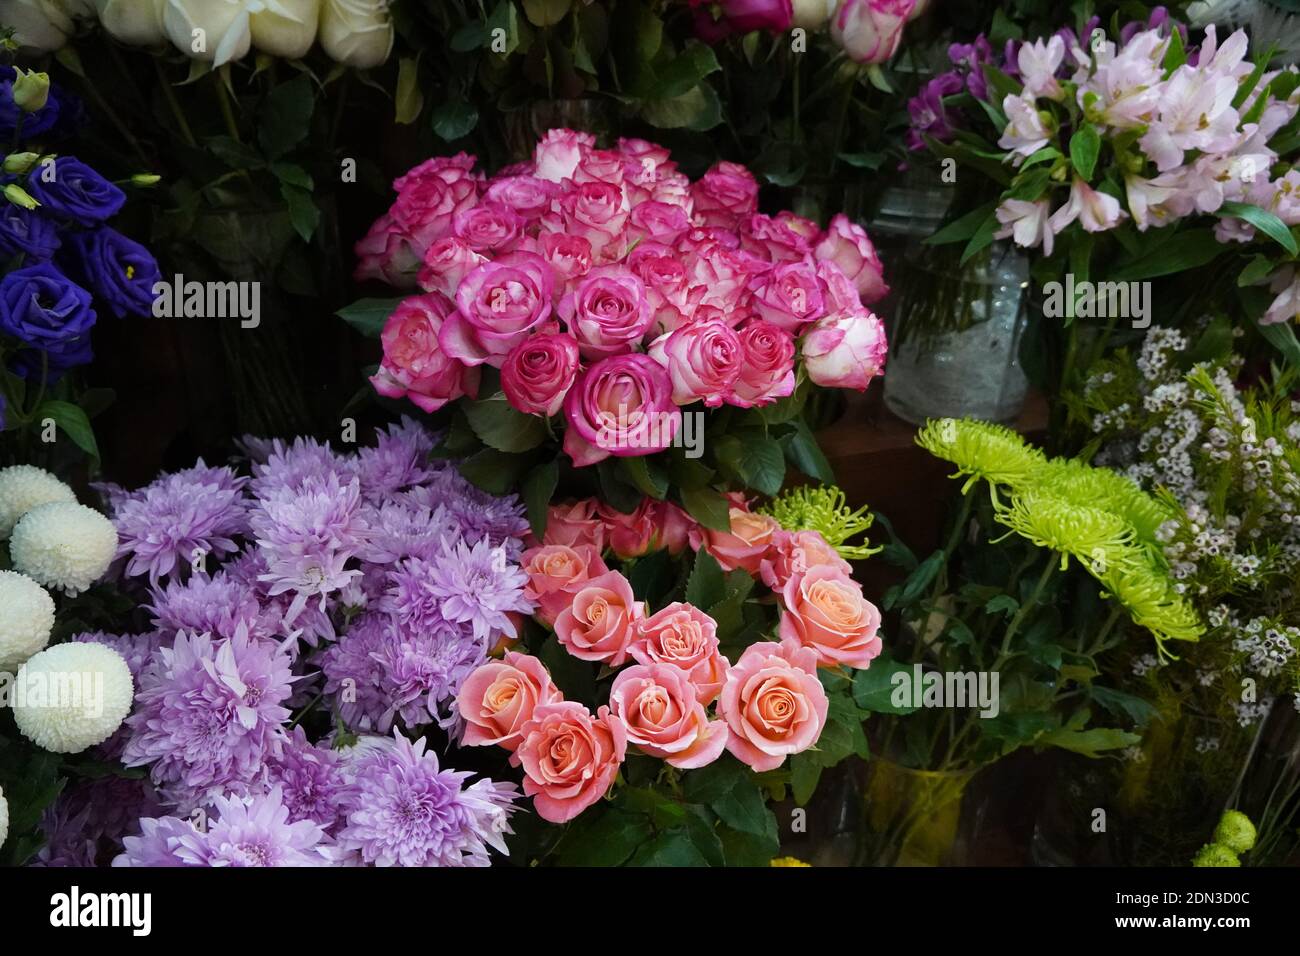 Bouquet of colorful roses and other different flowers at the entry to flower shop at farmers' market. Colorful peony, roses etc. Pots with flowers on Stock Photo